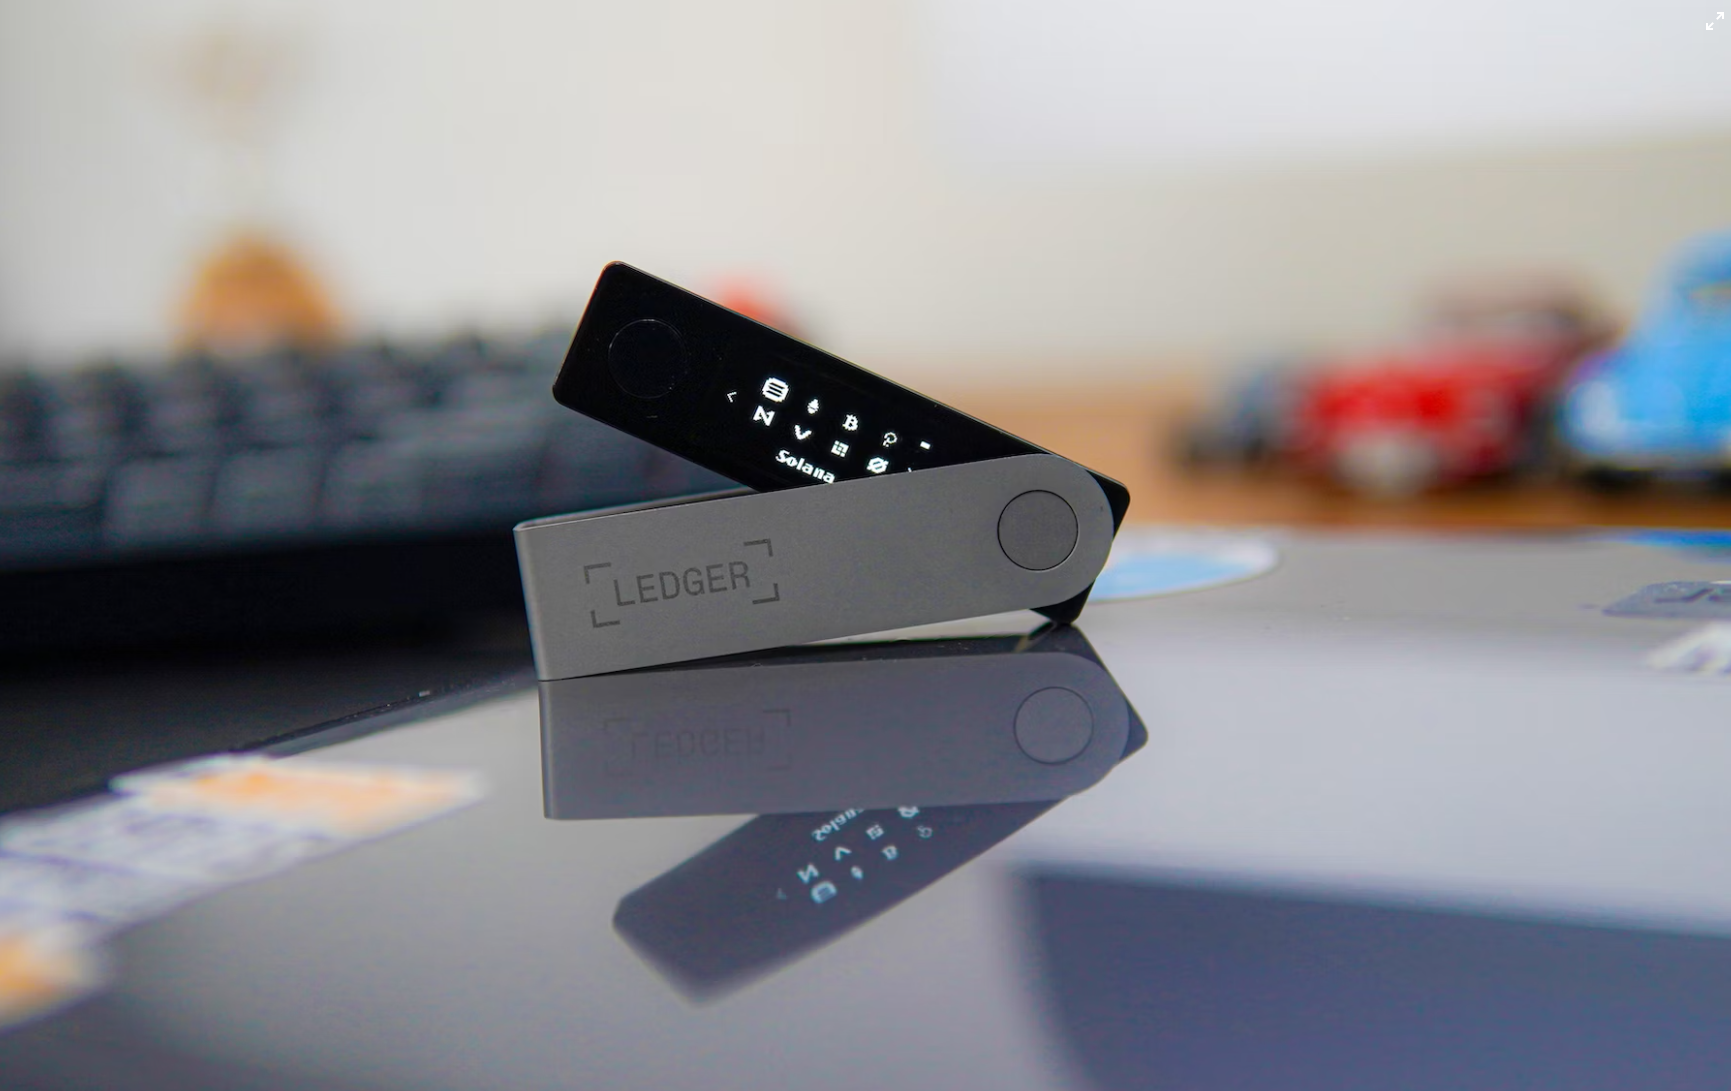 With Ledger's 'Safe Journey' Promotion, Buyers of Nano X and Nano S Plus Wallets Can Get Up to $30 in Free BTC